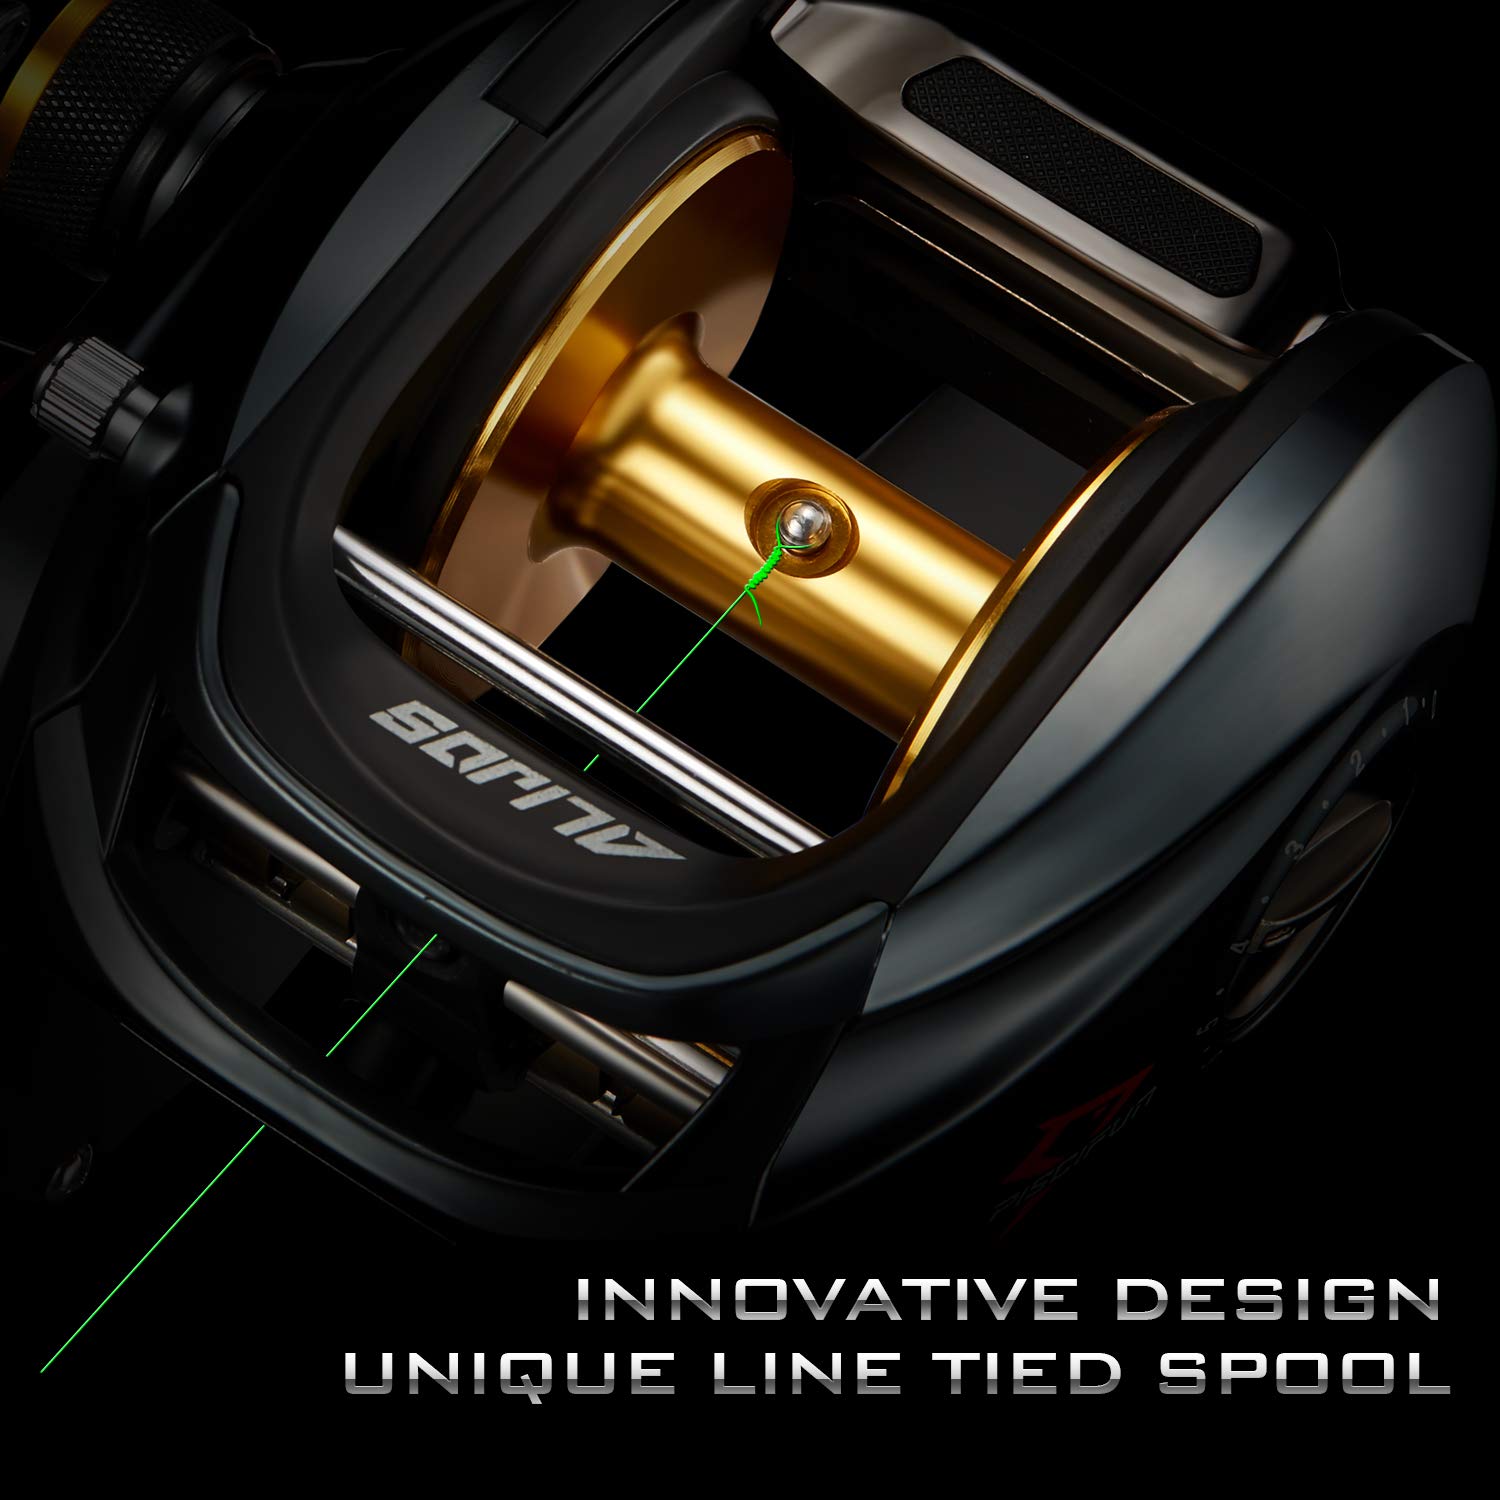 Top-Rated Baitcaster Reel: The Best Choice for Fishing Enthusiasts